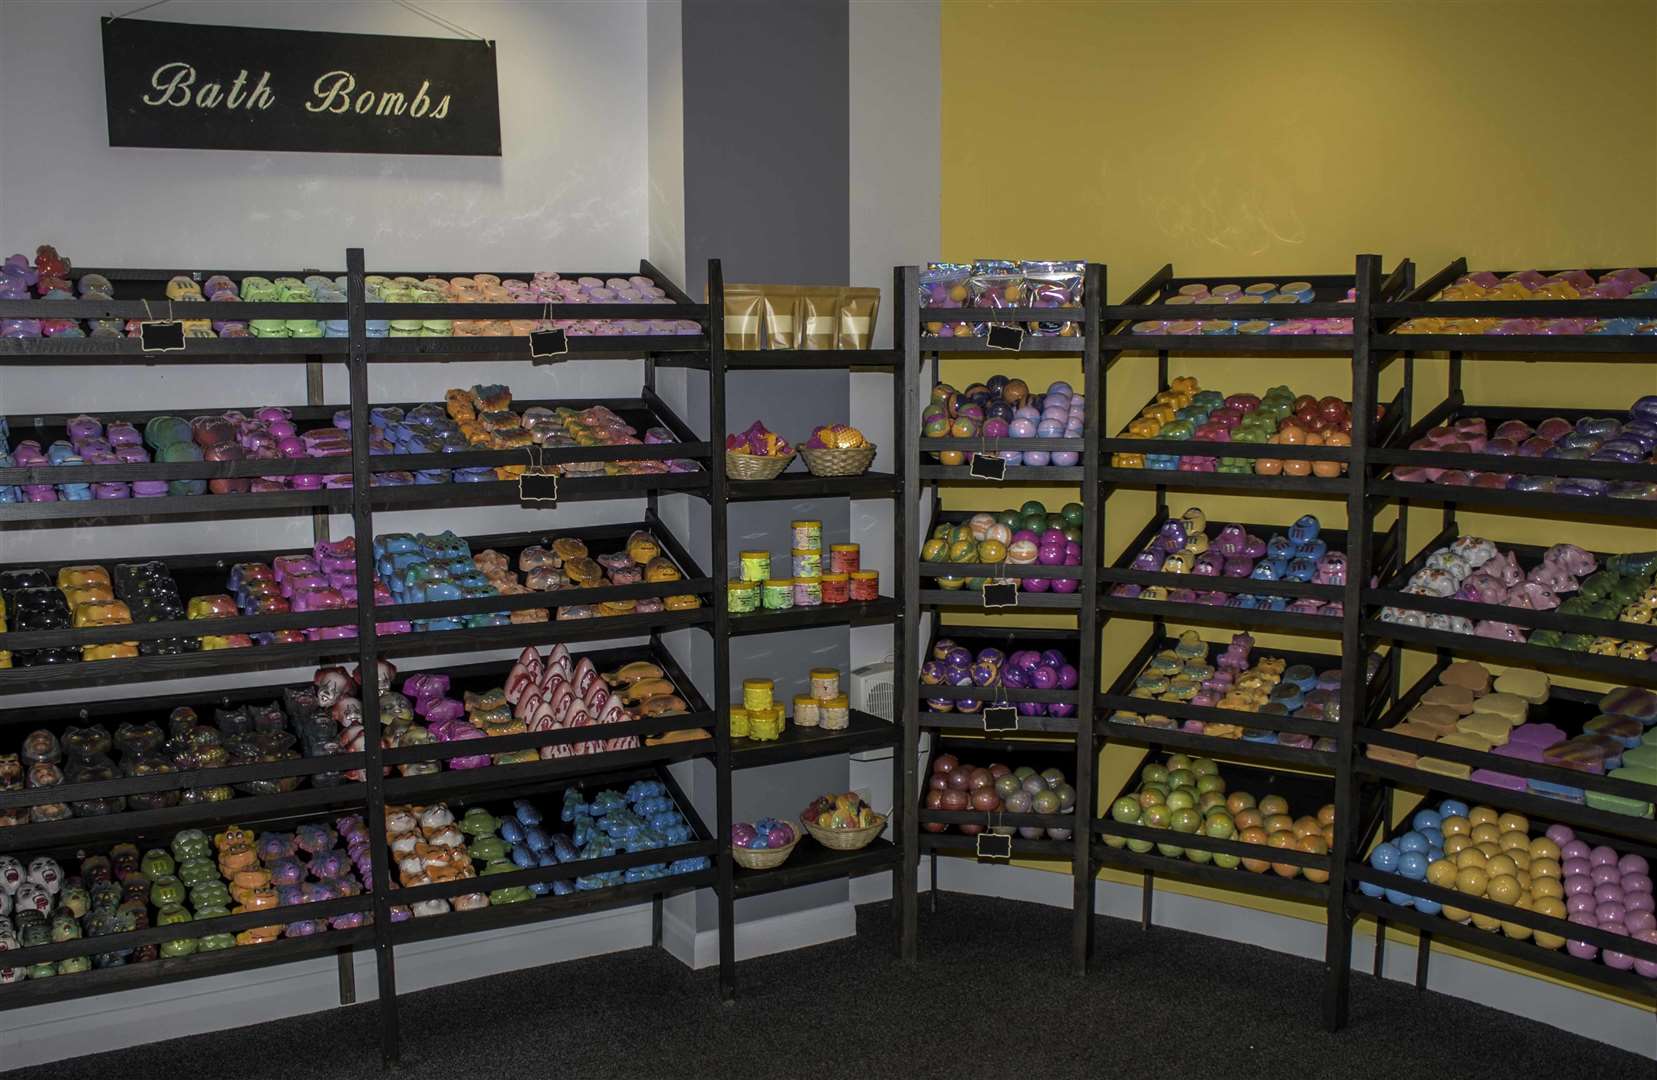 Bath bombs were joined by creams, scrubs, melts and candles on the shelves at Bath Bomb Boom